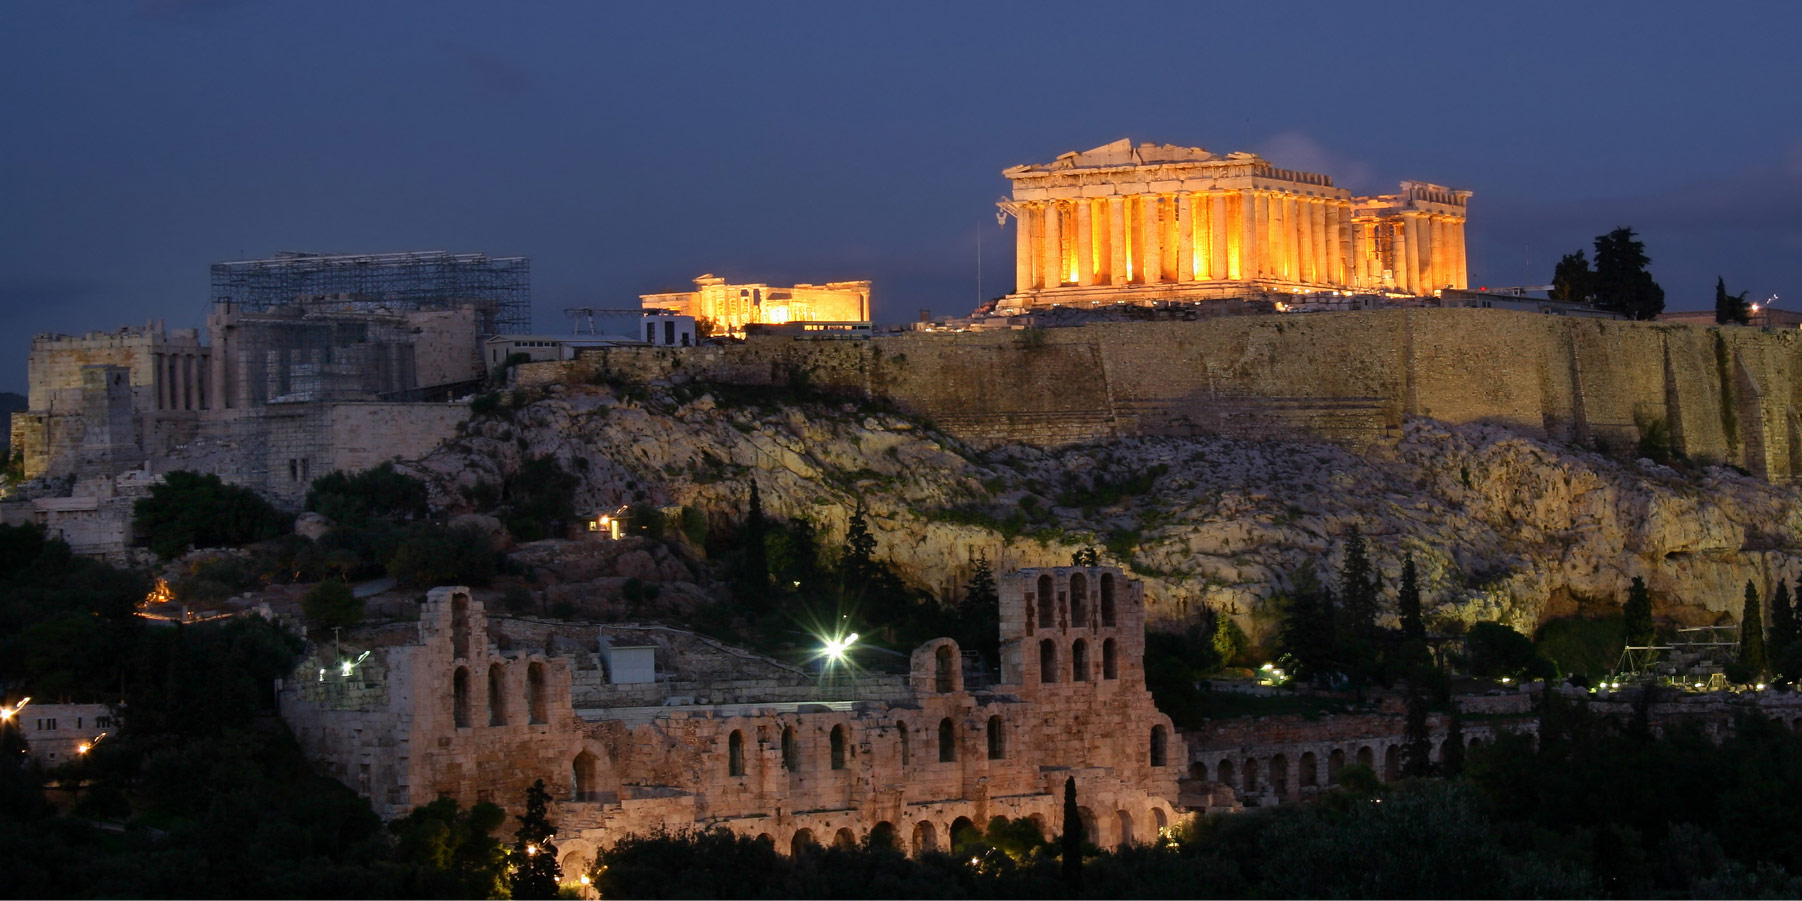 Athens travel guide for first-time visitors - Best Places to Visit in Europe - planningforeurope.com (2)